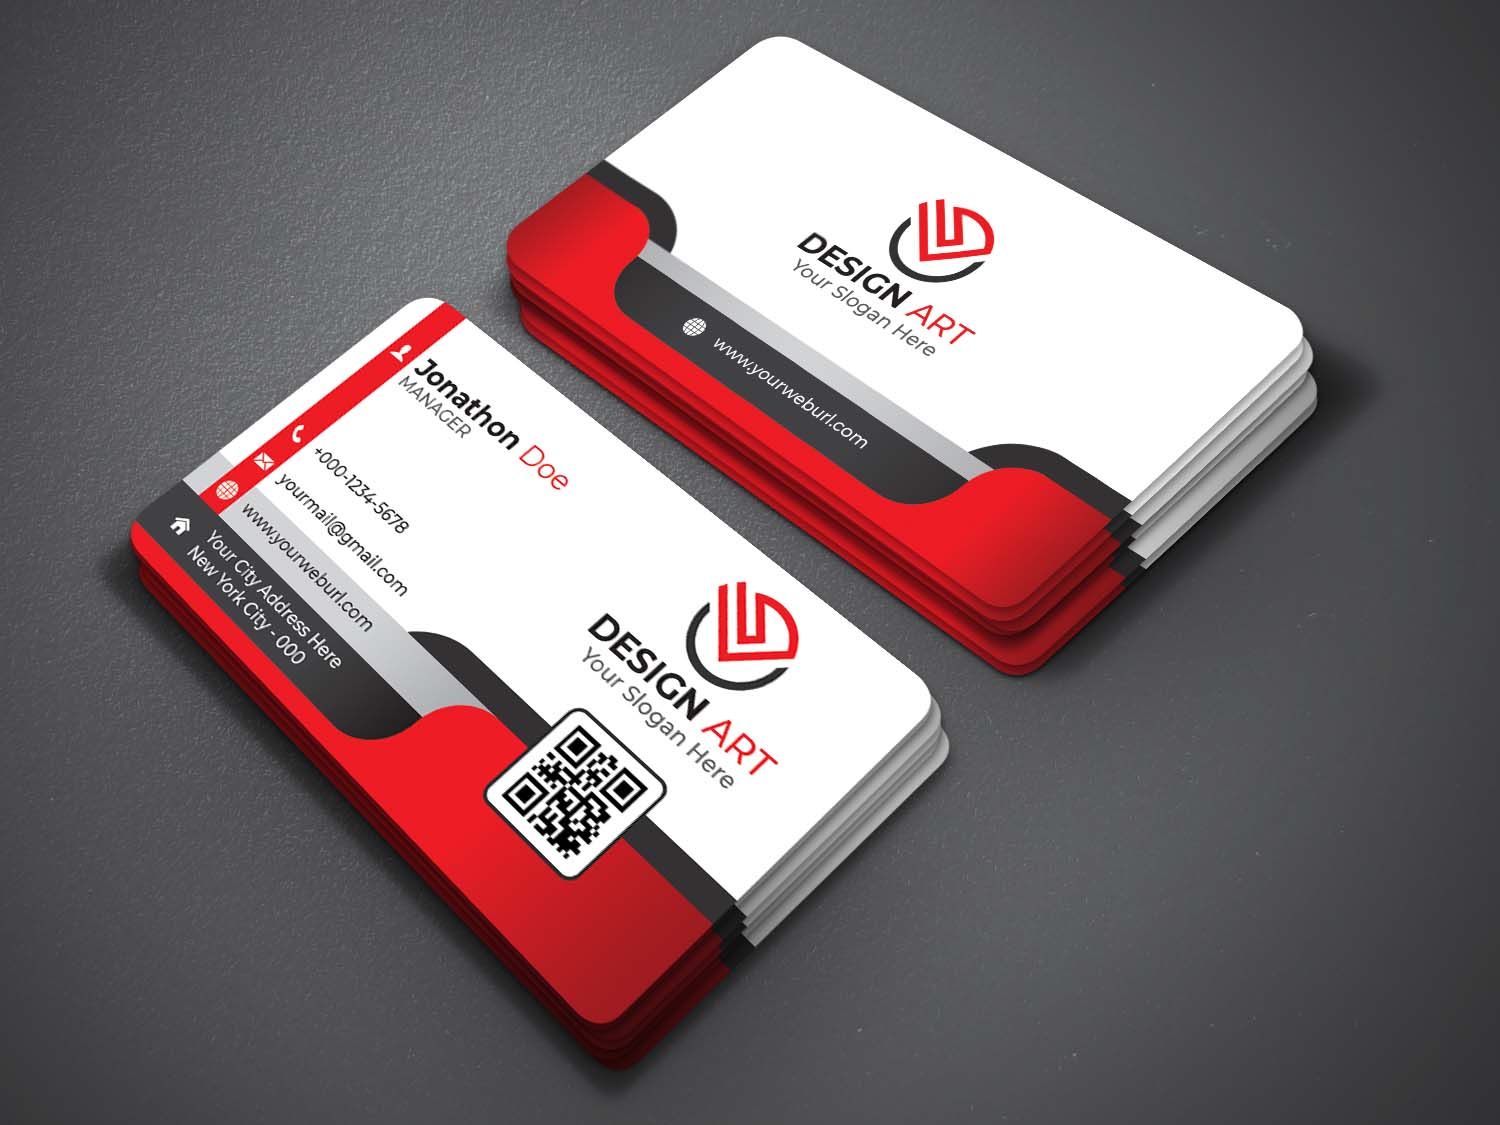 Two red and white business cards on a gray surface.